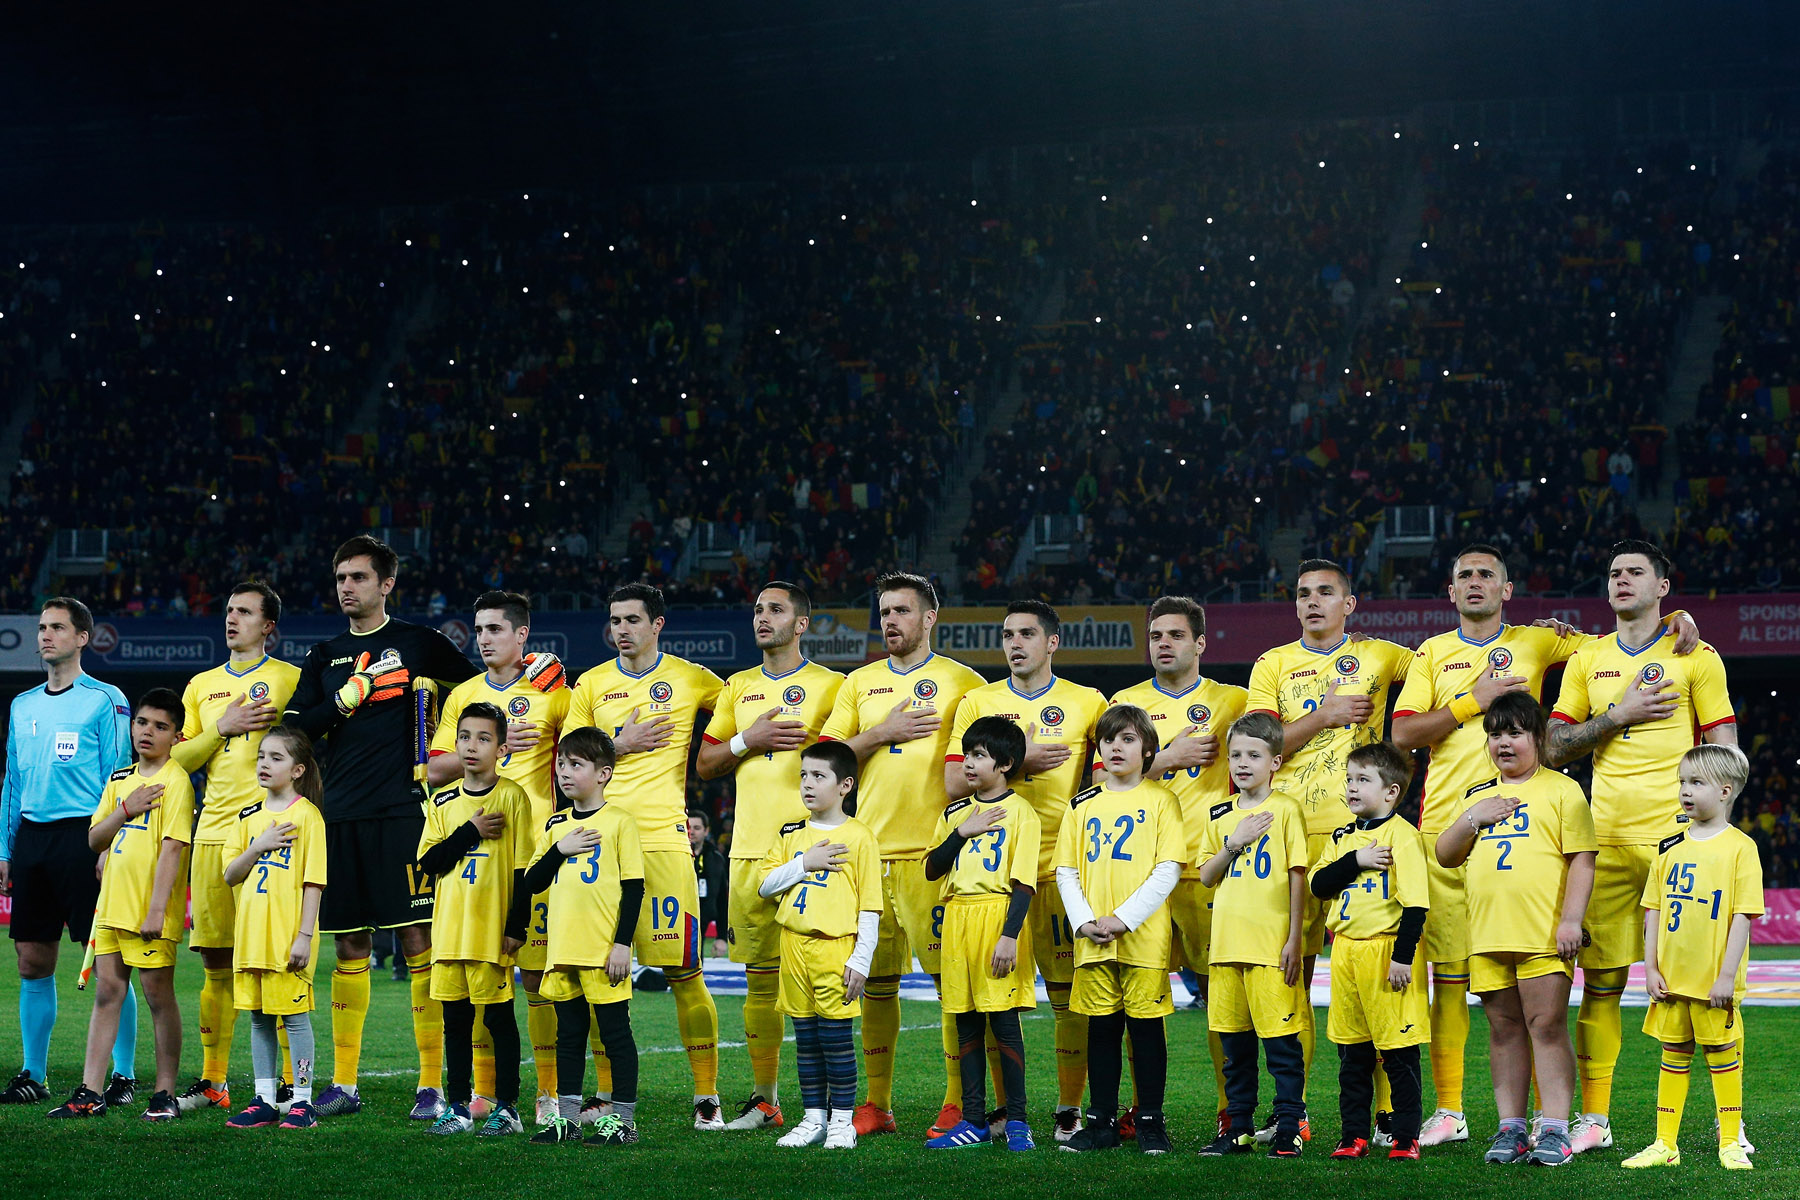 CLUJ-NAPOCA, ROMANIA - MARCH 27: The team of Romania line up during the International Friendly match between Romania and Spain held at the Cluj Arena on March 27, 2016 in Cluj-Napoca, Romania. (Photo by Dean Mouhtaropoulos/Getty Images)